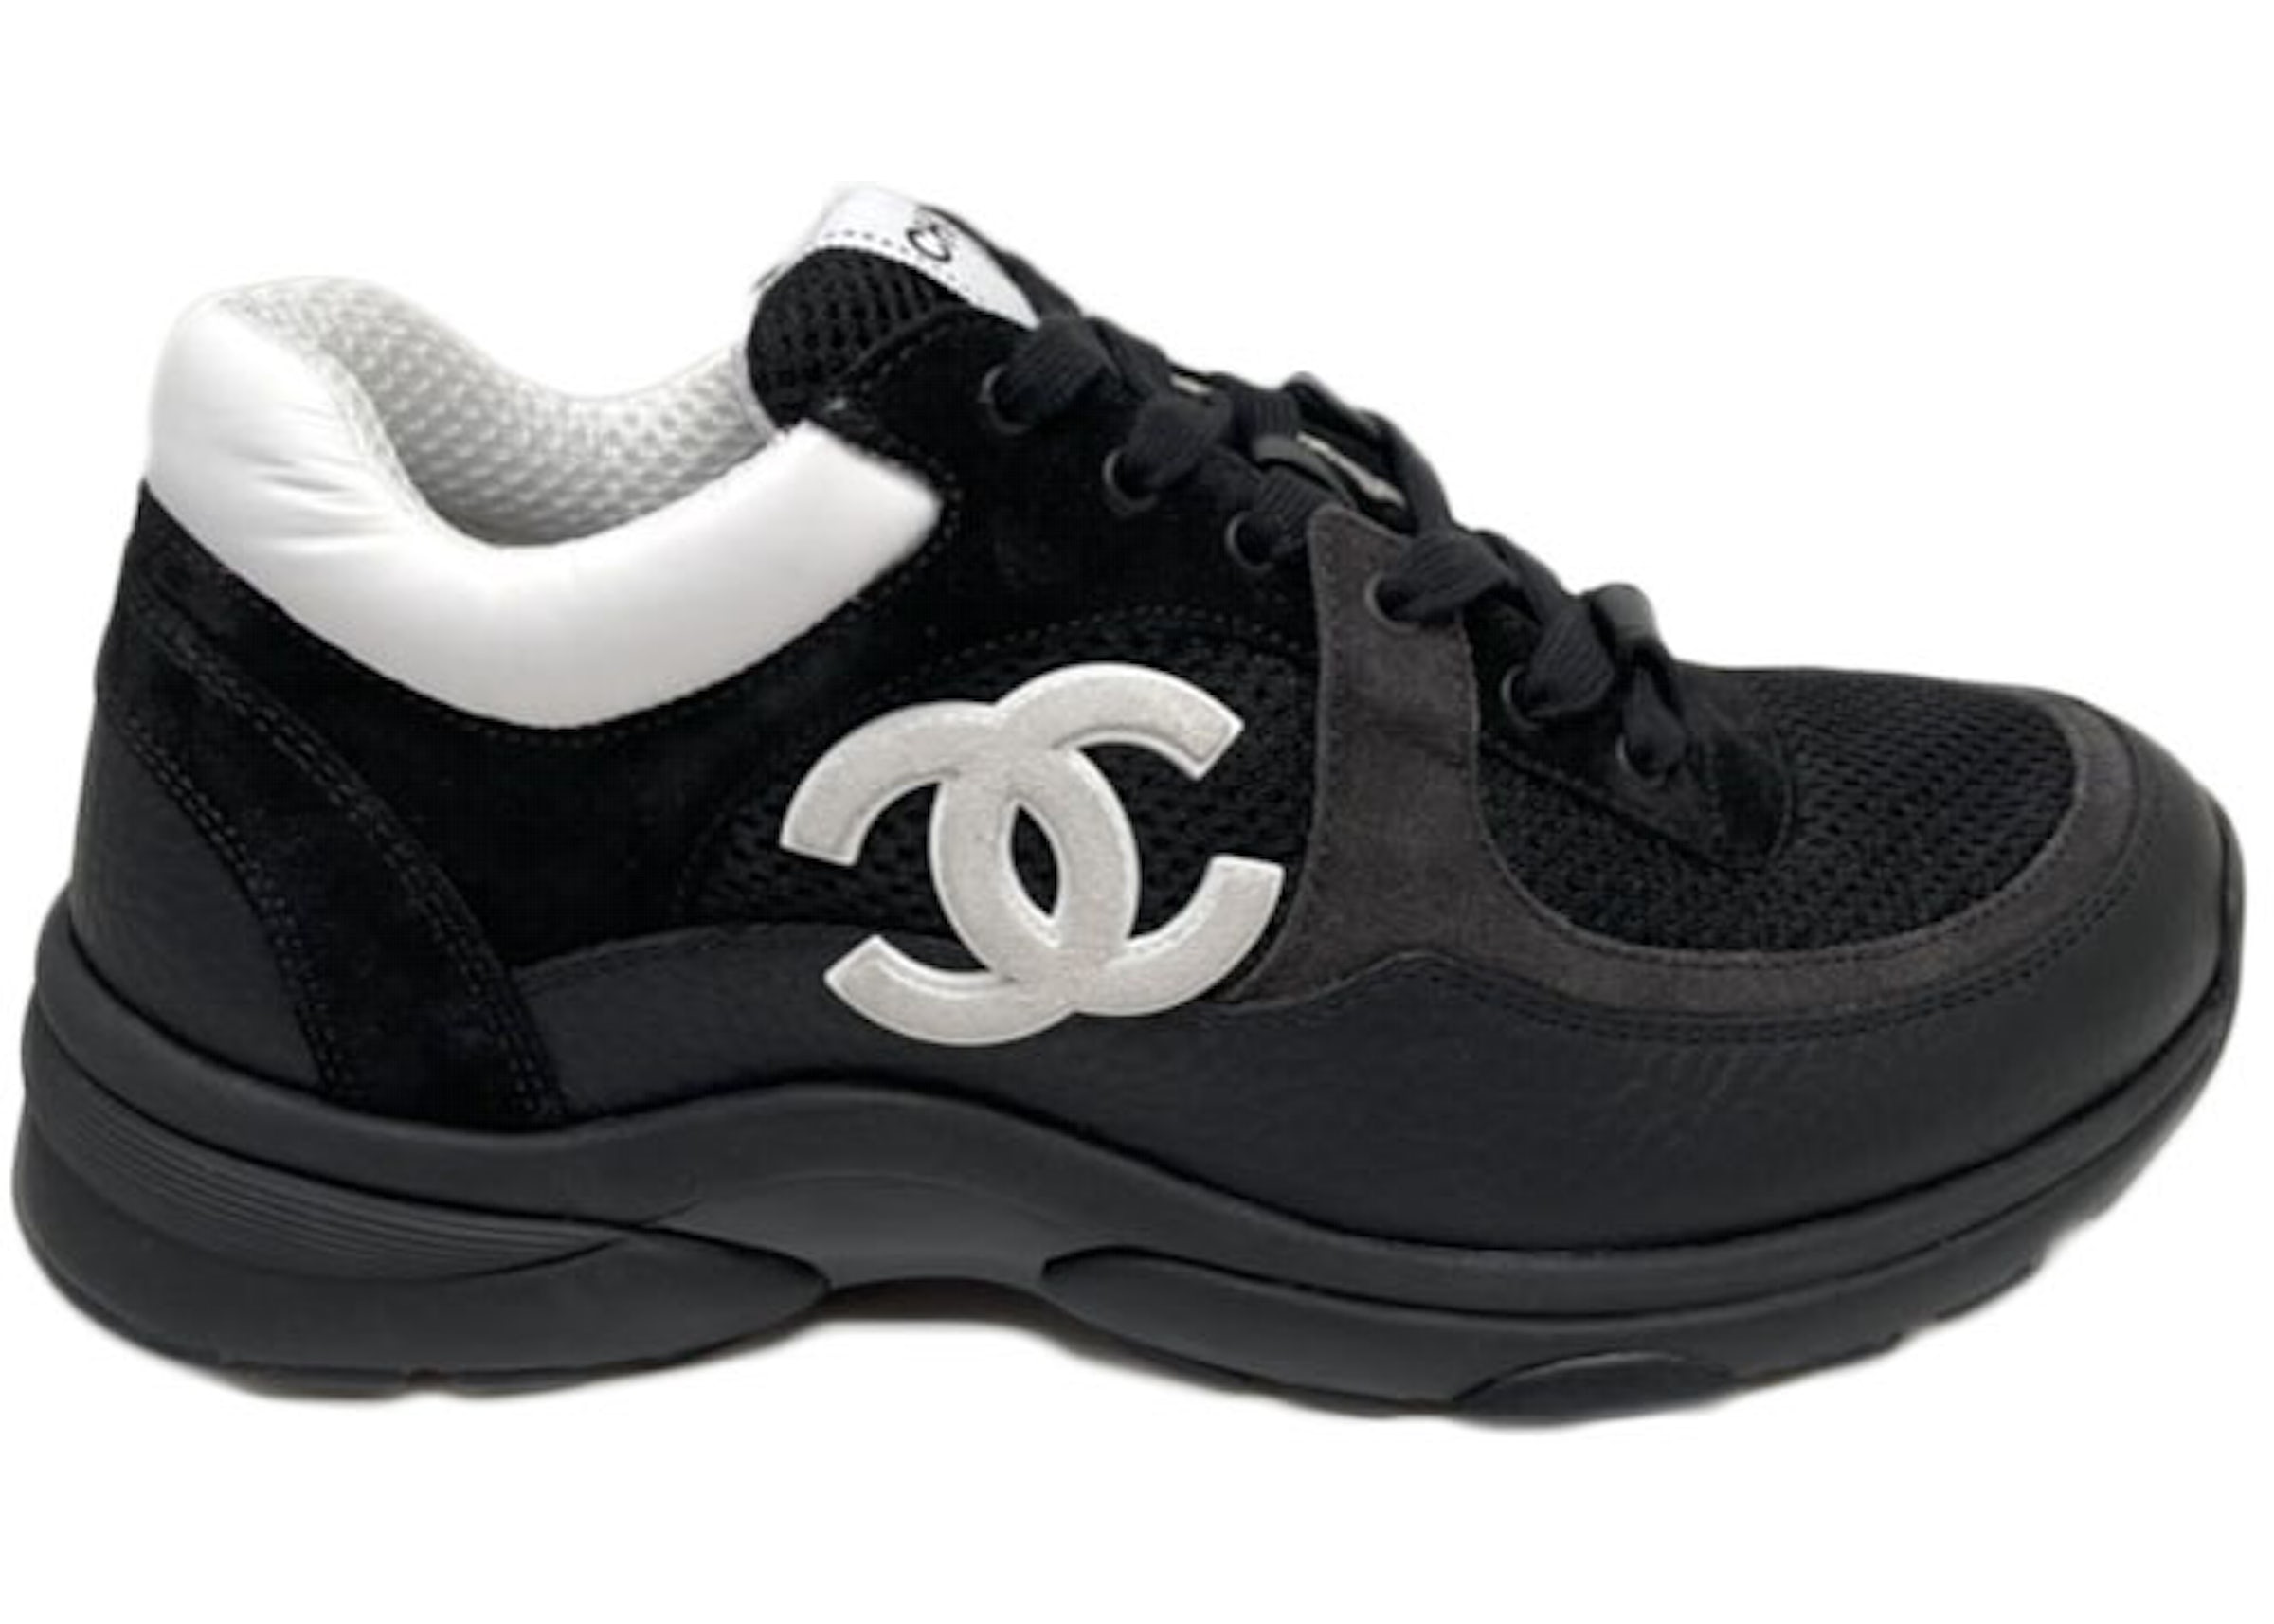 CHANEL sneakers COCO Mark leather Black white mens Used – JP